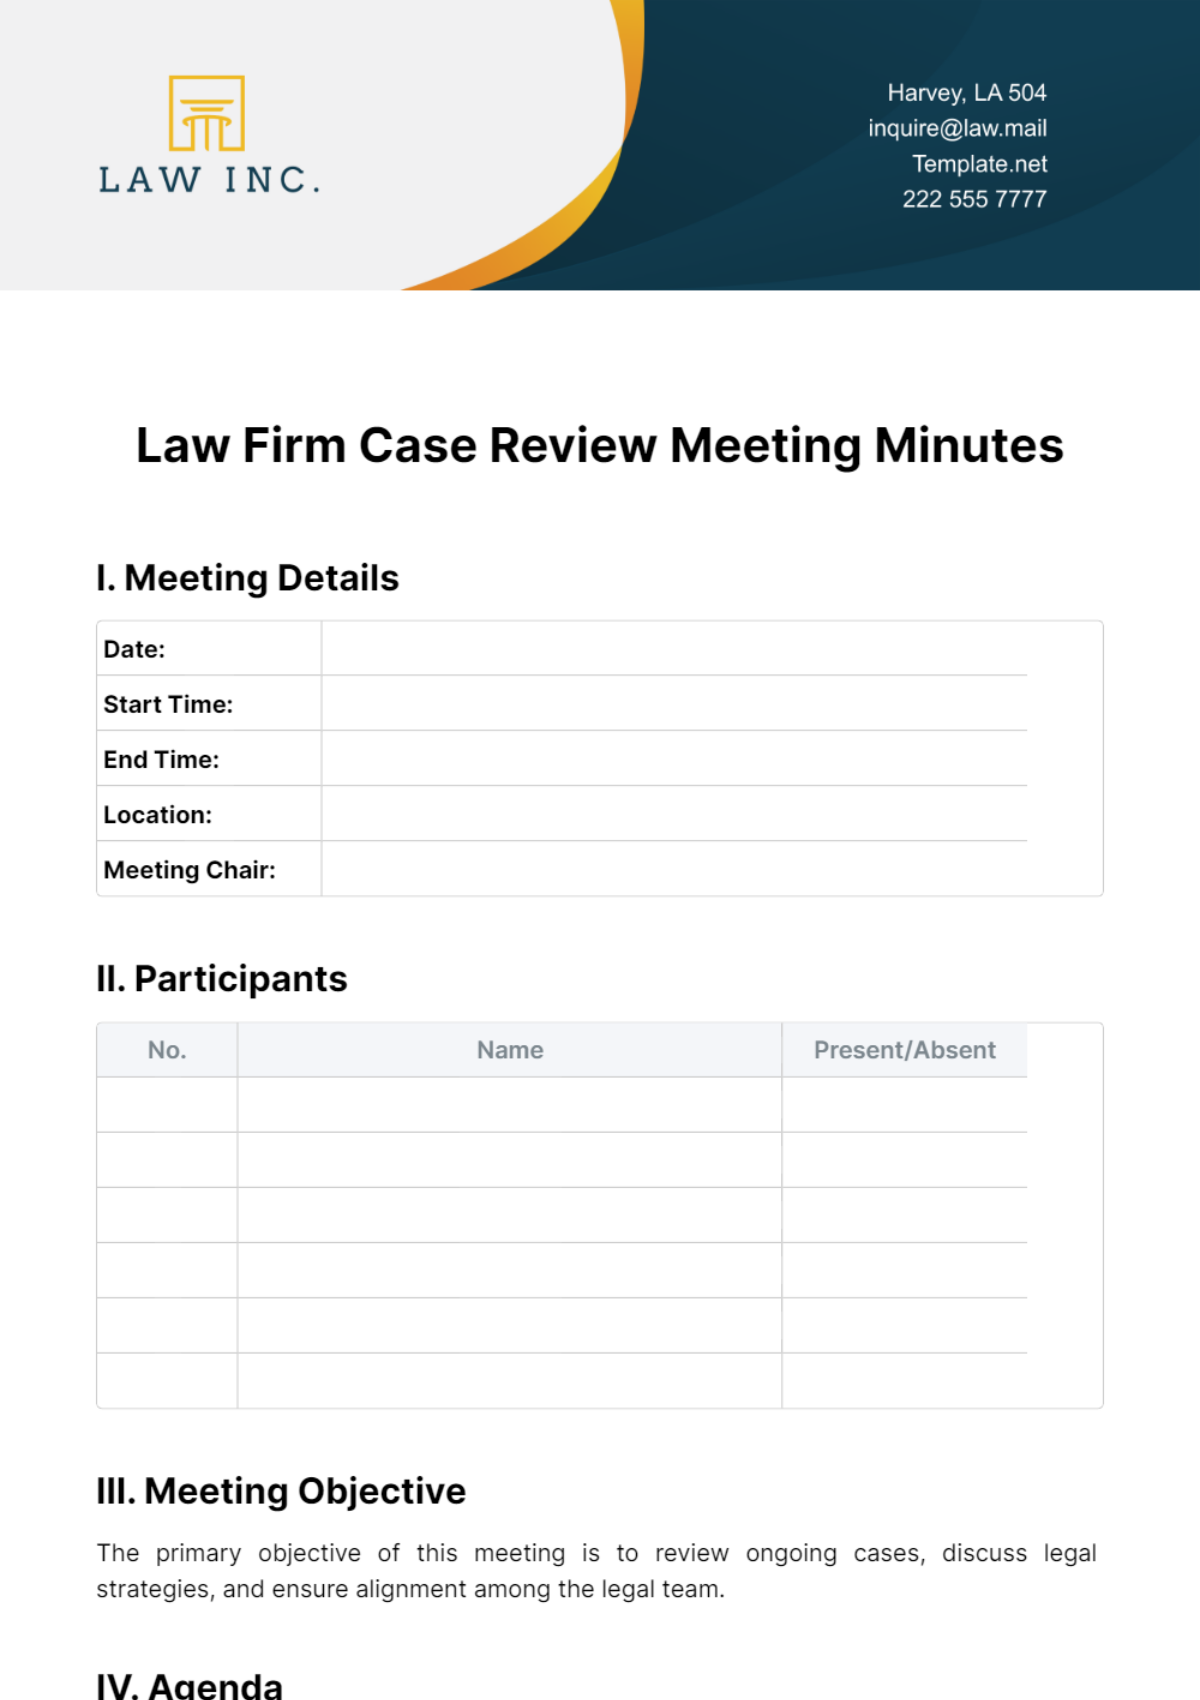 Law Firm Case Review Meeting Minutes Template